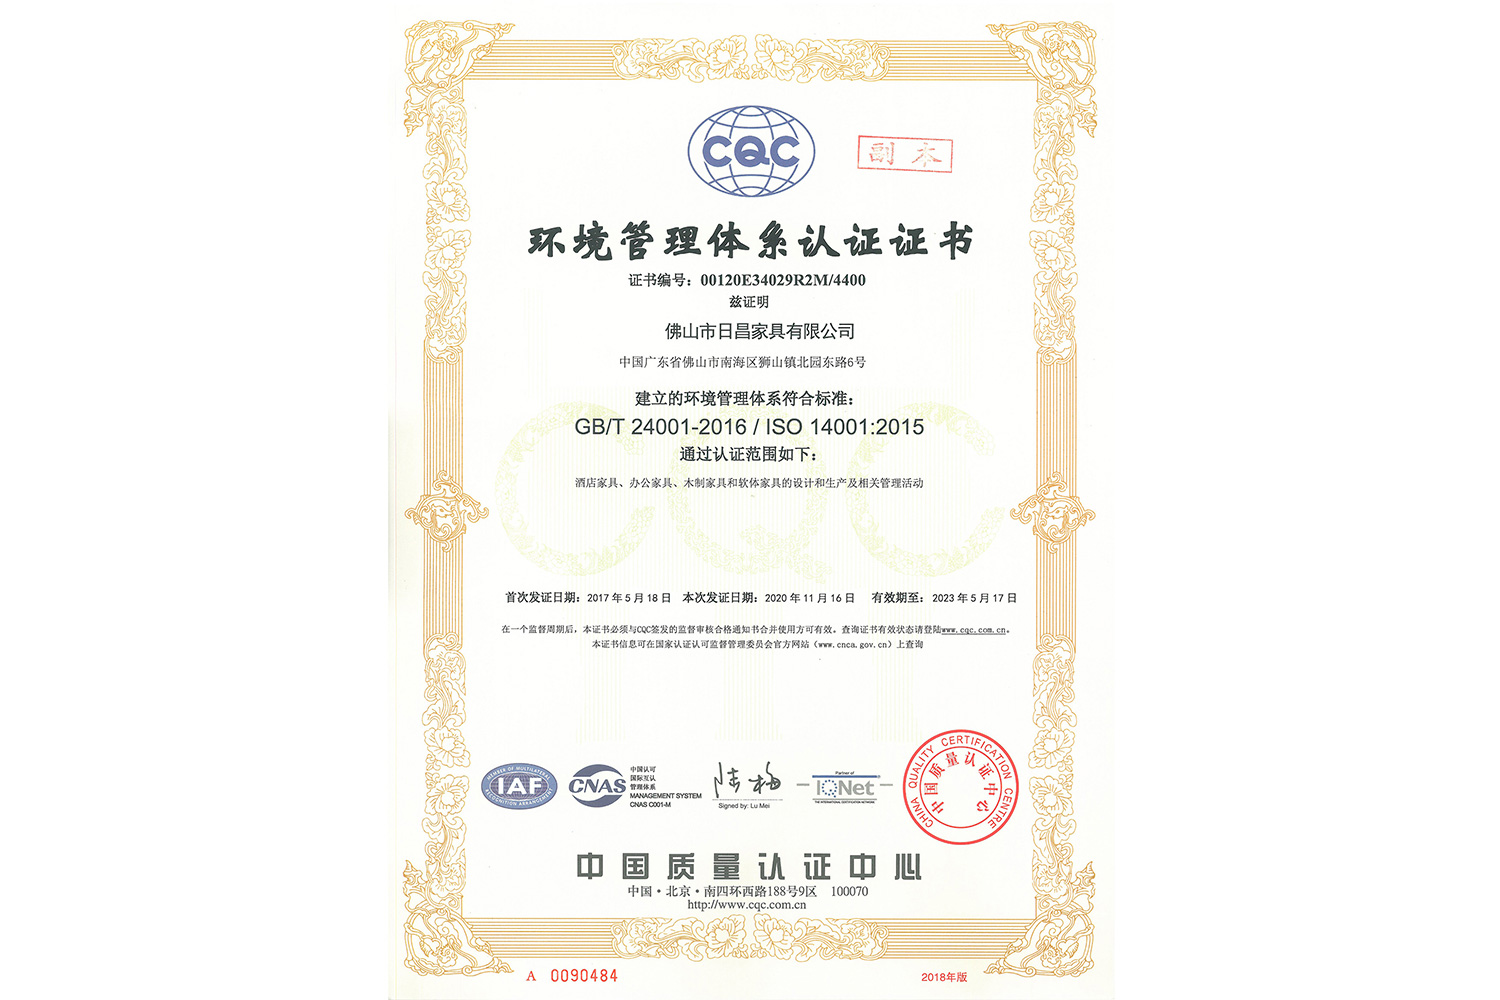 Environmental Management System Certification Certificate (Copy)